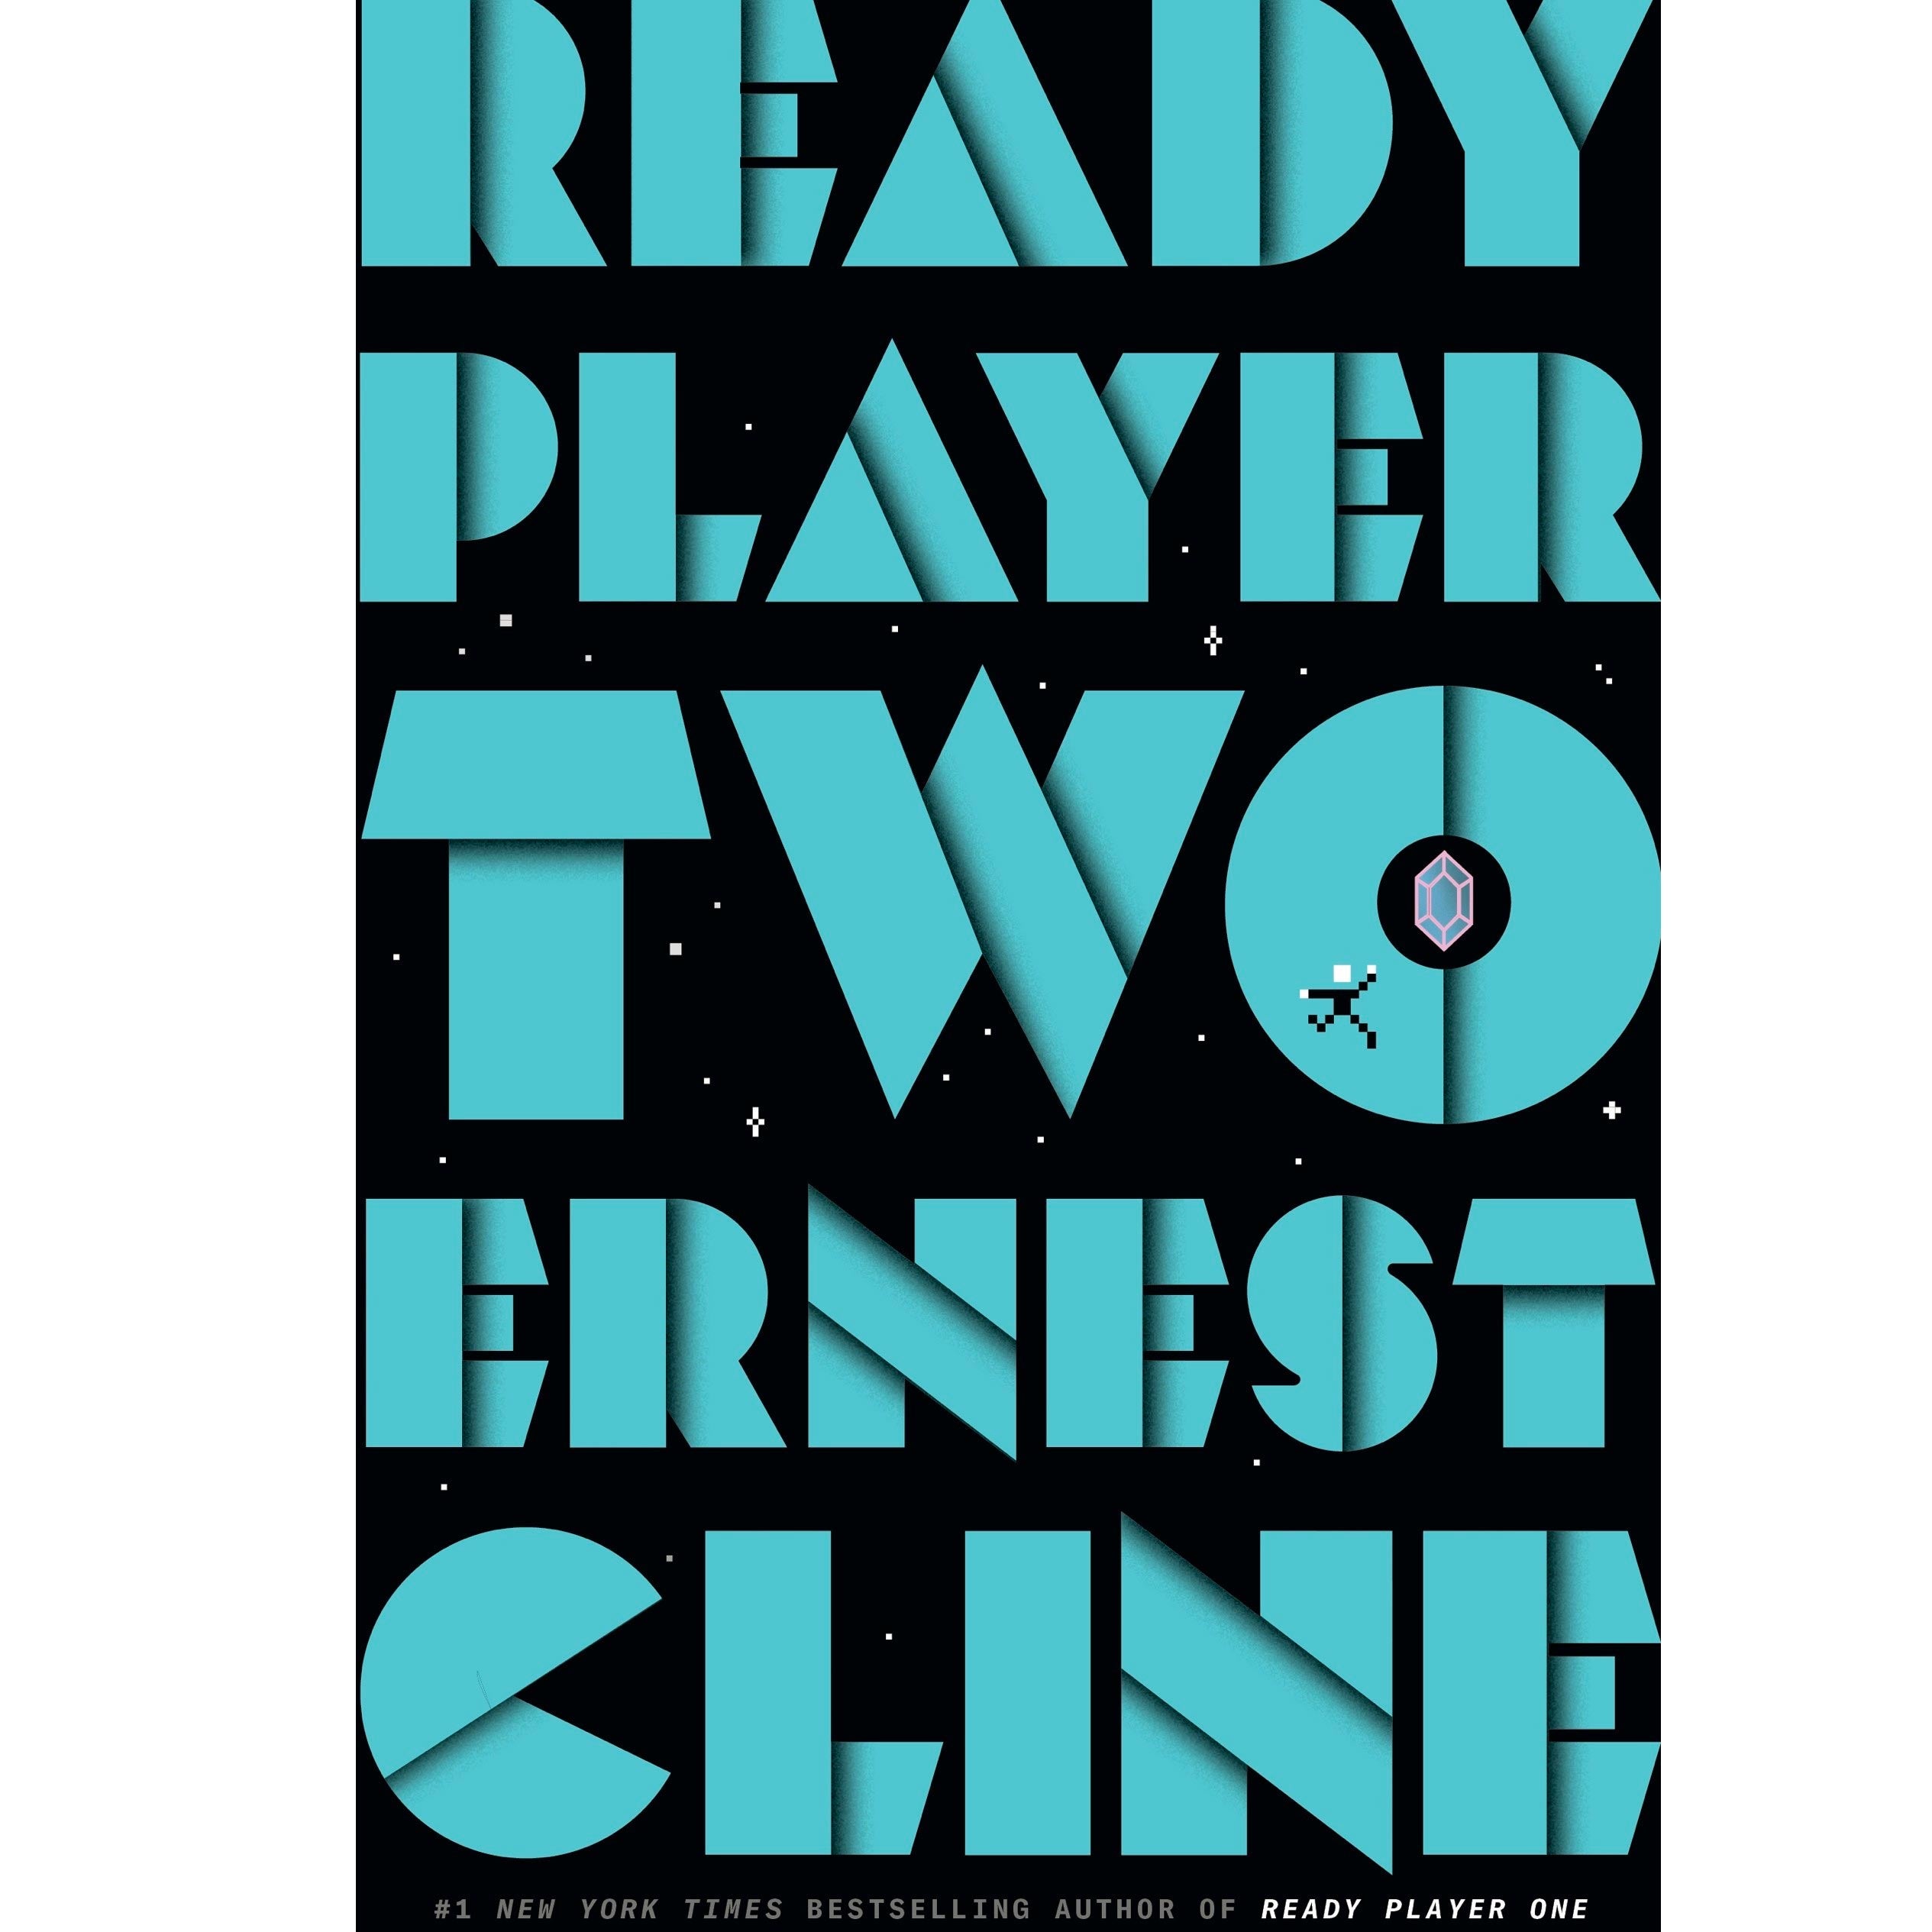 The cover of Ready Player Two.